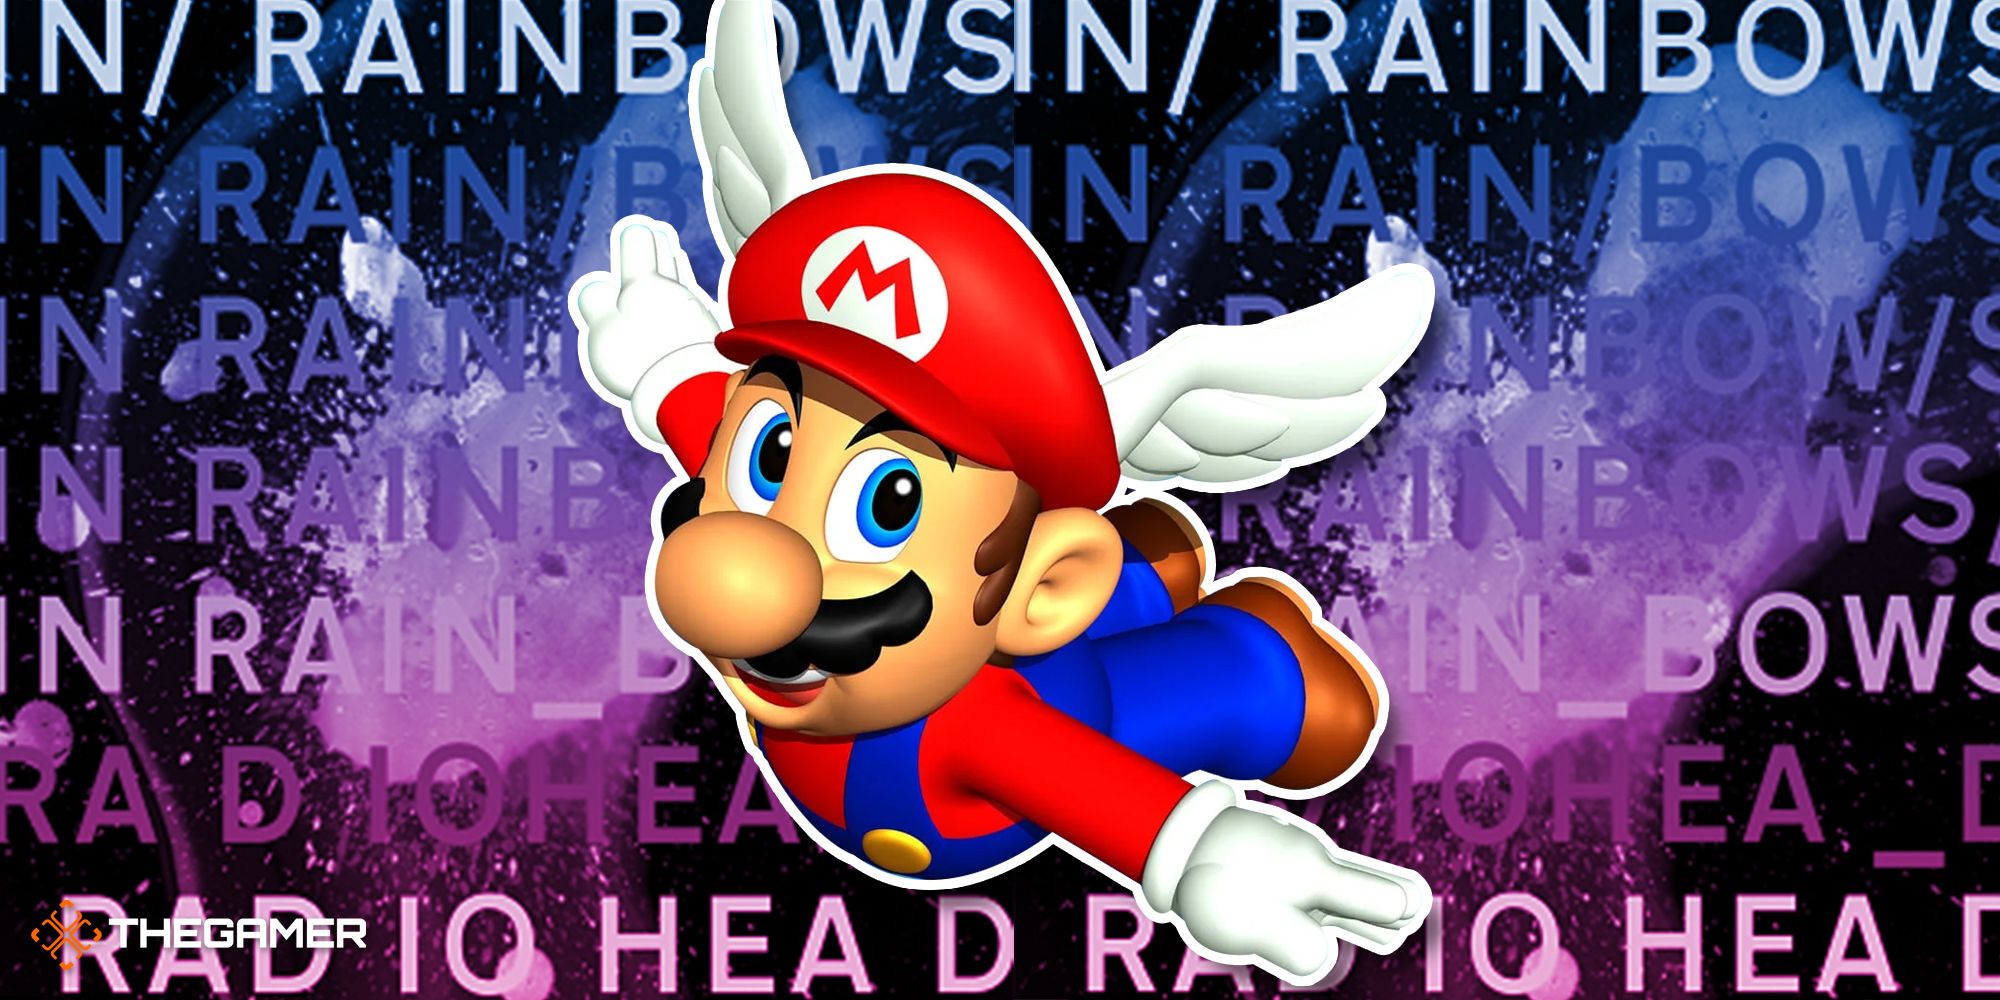 An image showing flying Mario from Mario 64 over Radiohead's In Rainbows album cover